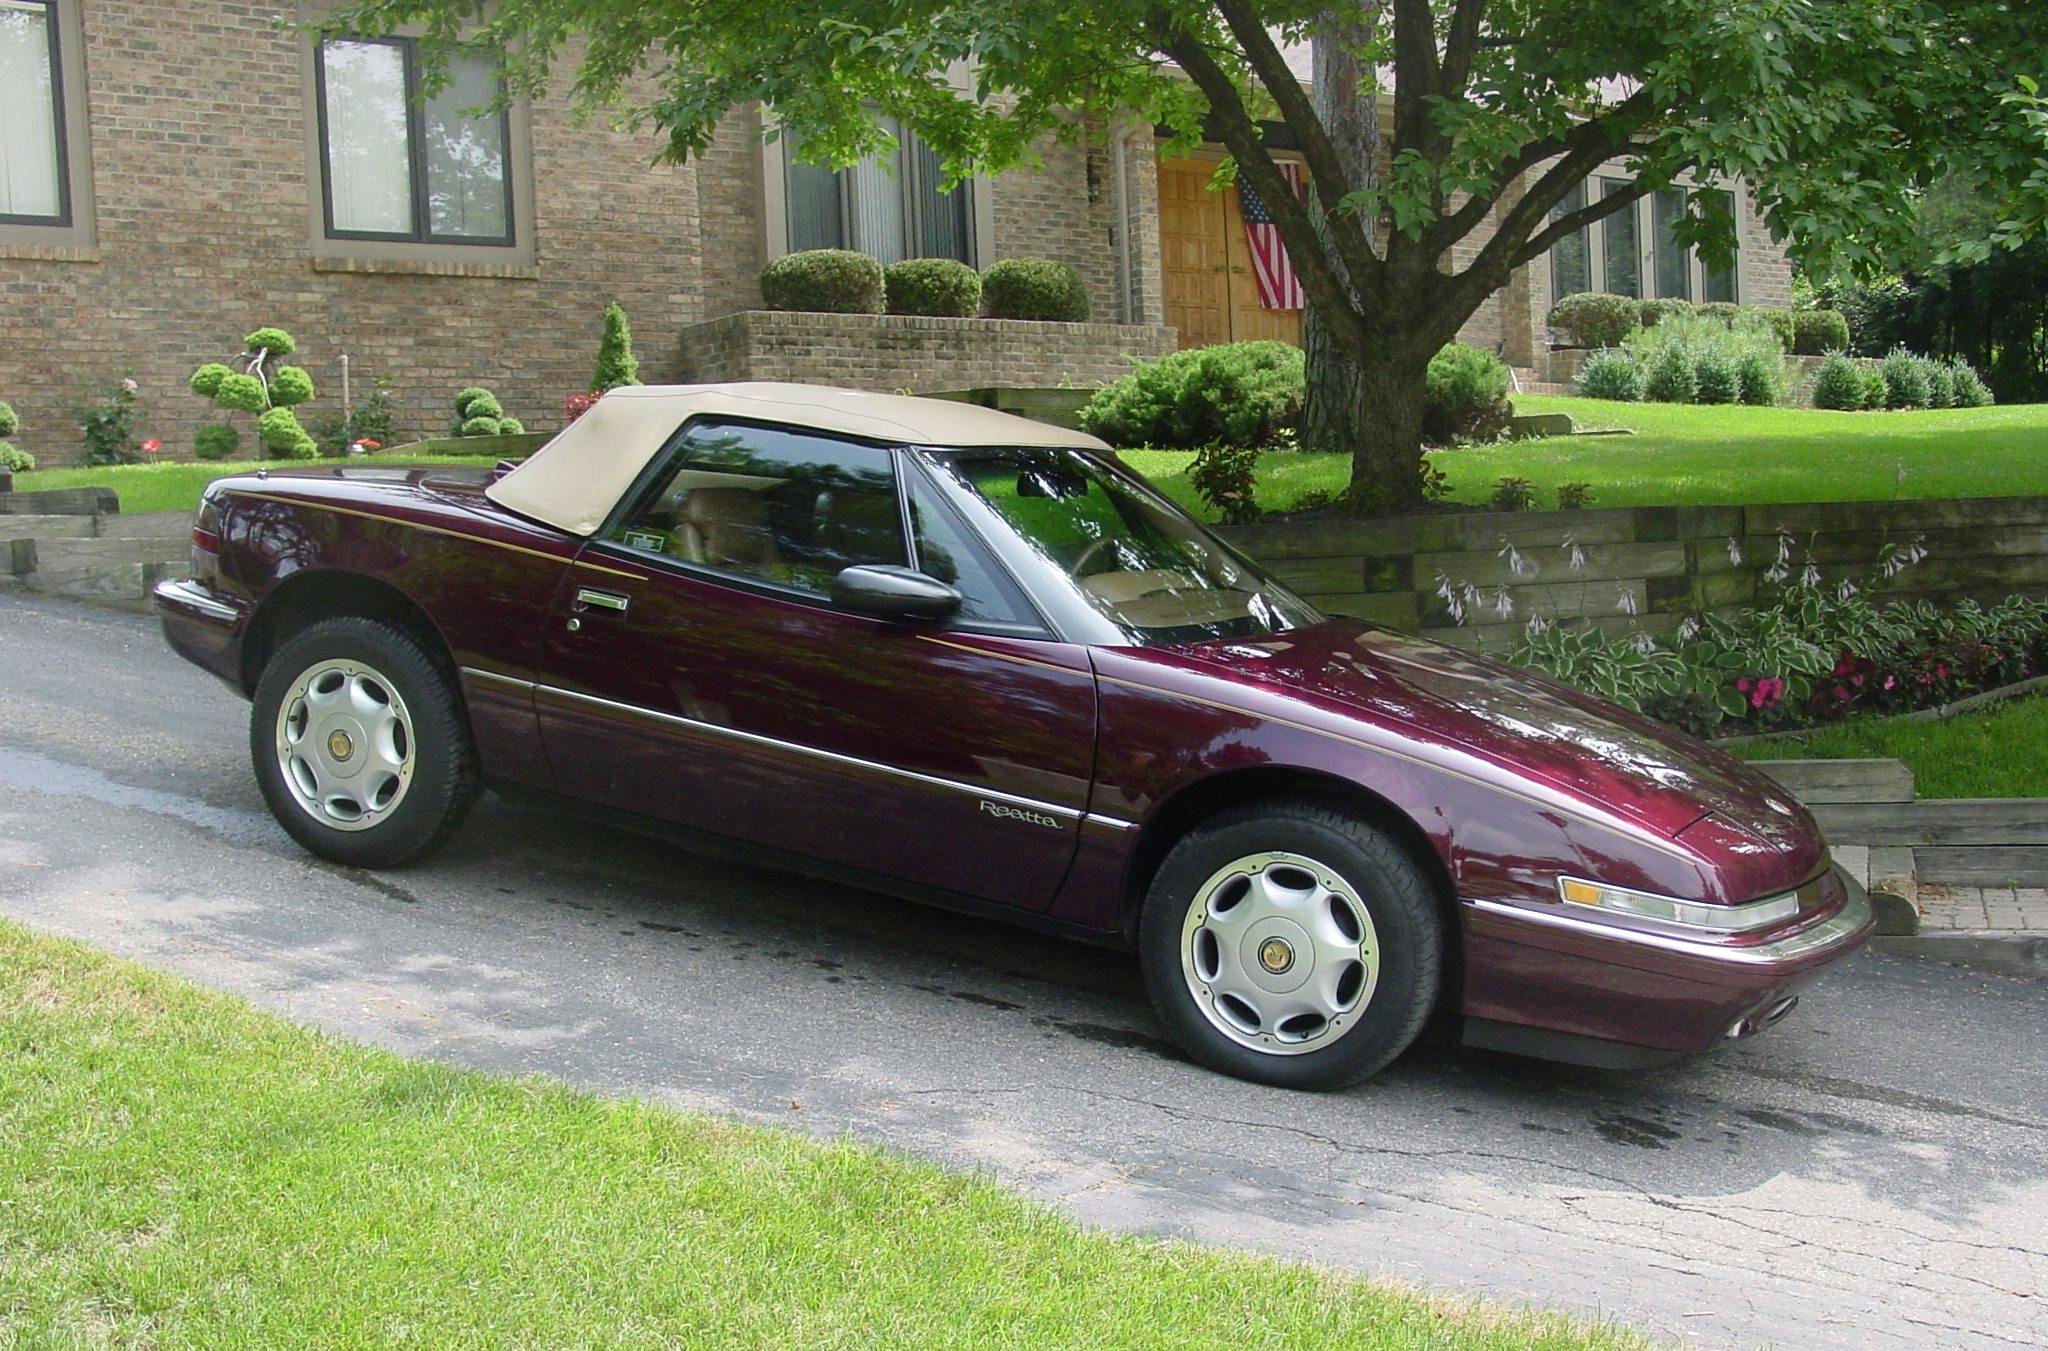 Reatta Convertible Coupe Side Profile In Driveway